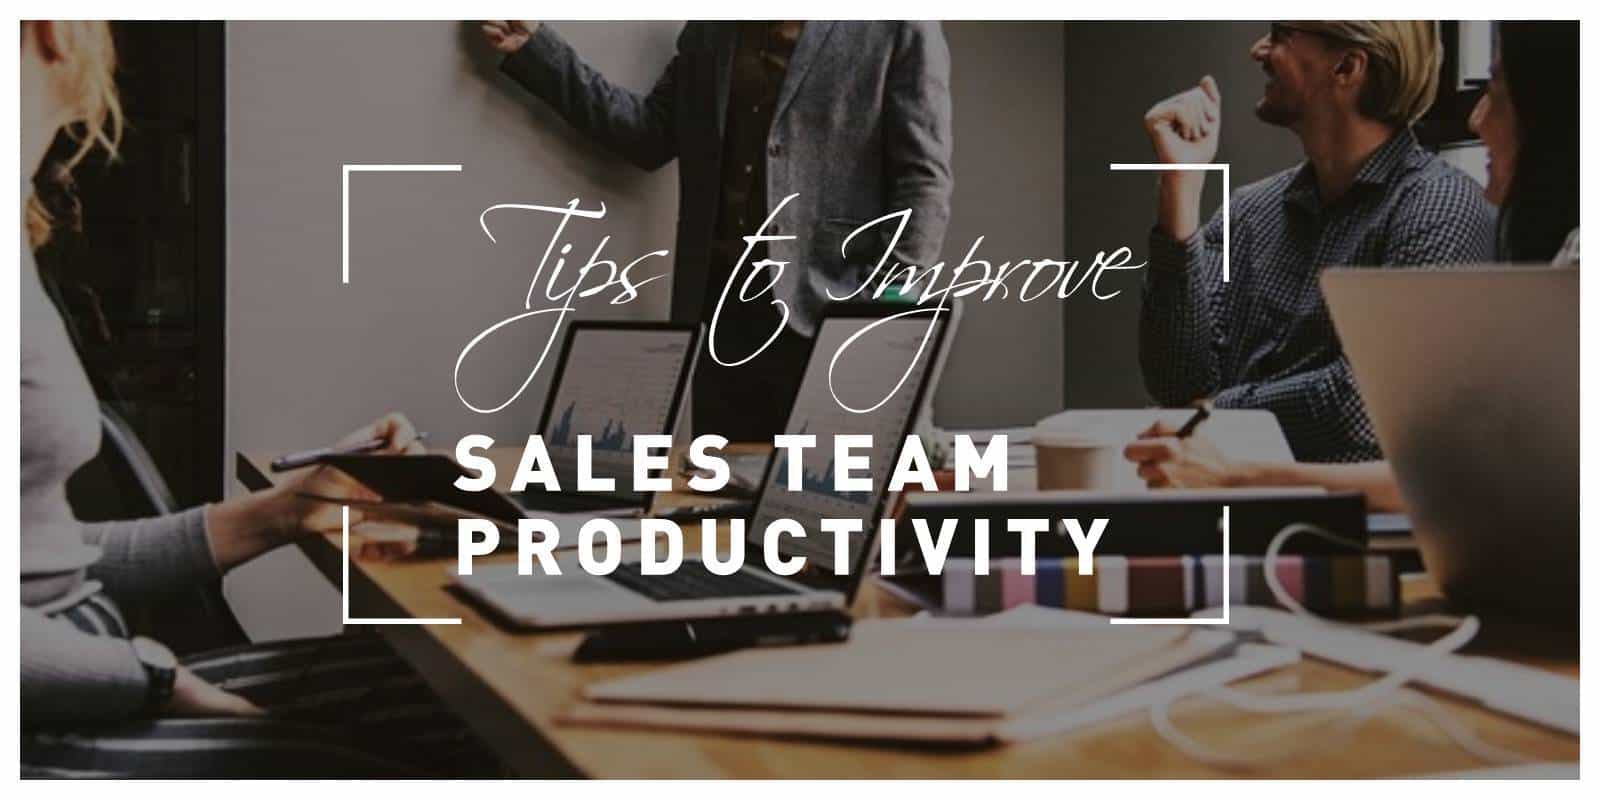 Five Tips to Help You Improve Your Sales Team’s Productivity